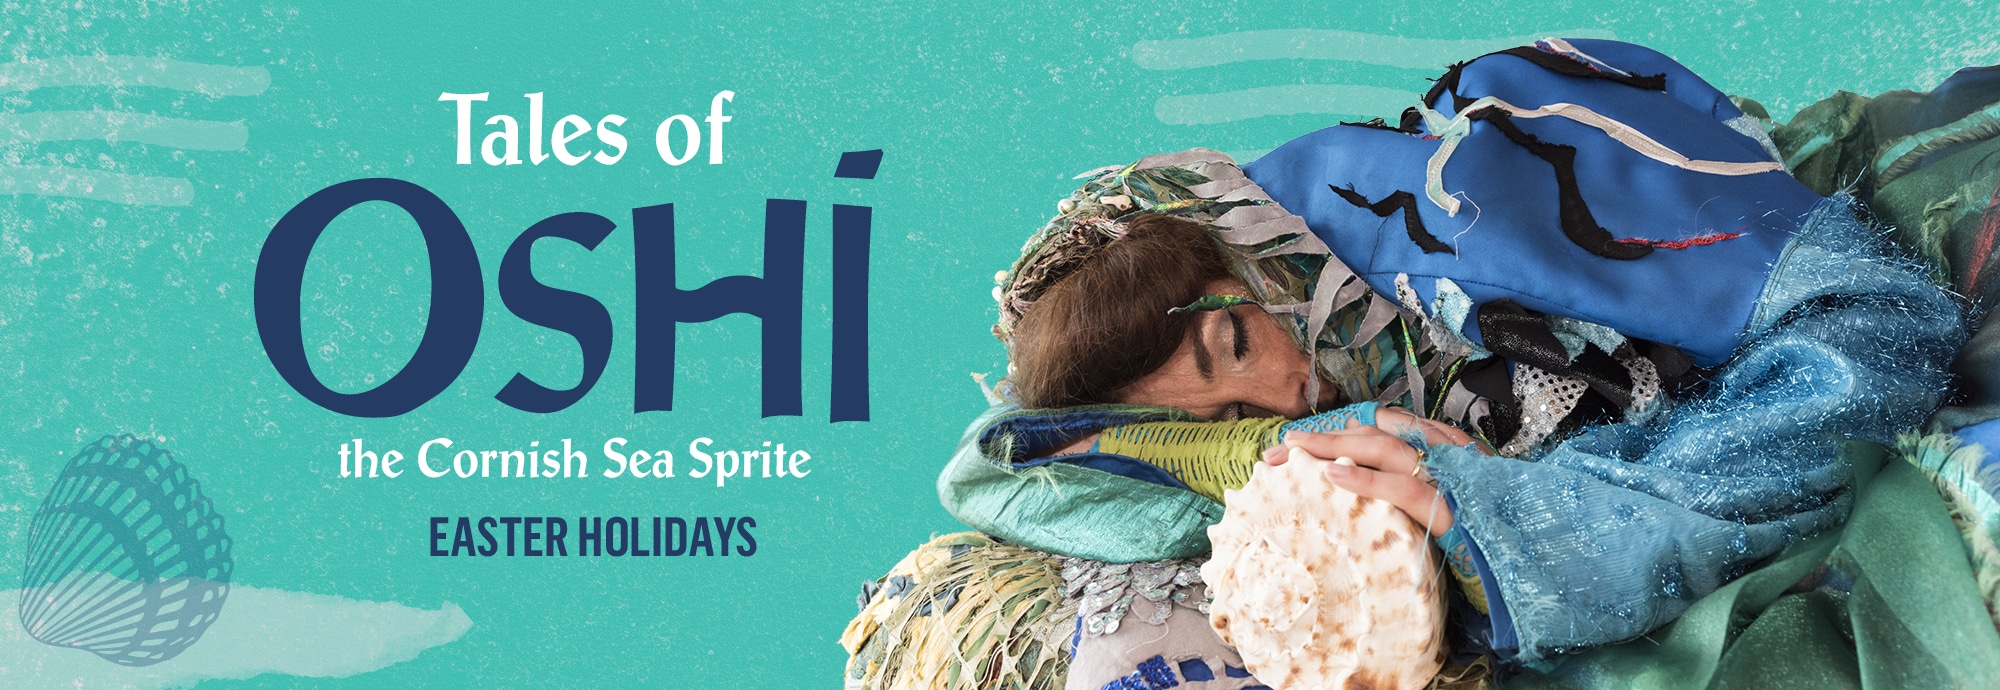 Text on the left against a blue-green background reads 'Tales of Oshi the Cornish Sea Sprite' and 'Easter Holidays'. On the right, a woman in a blue costume lies on her side with her eyes closed, one hand resting on a conch shell.